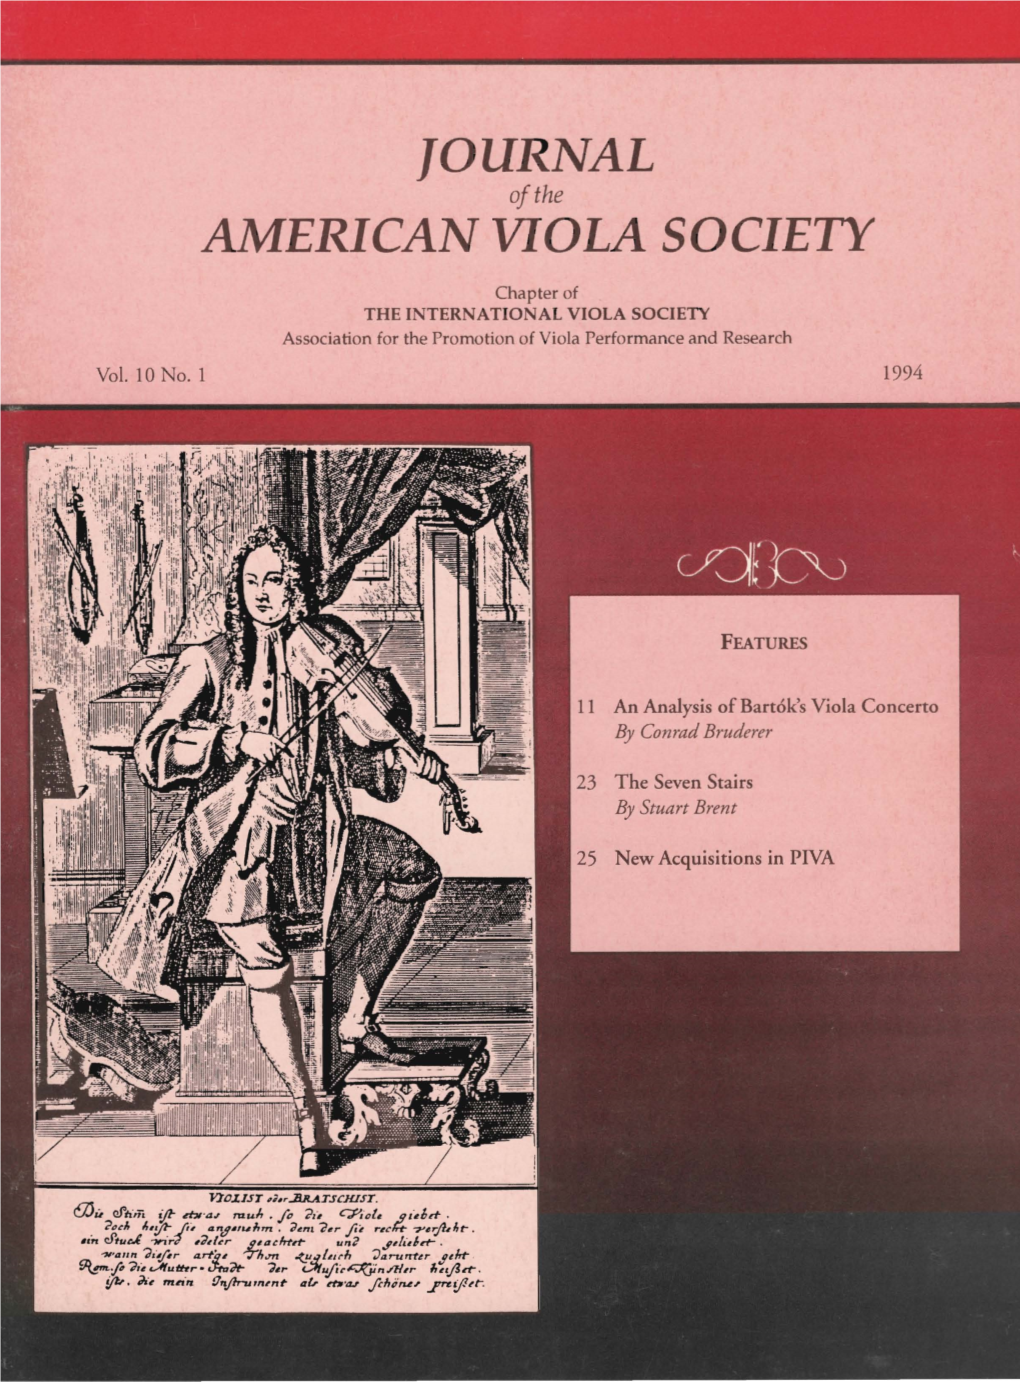 Journal of the American Viola Society Volume 10 No. 1, 1994